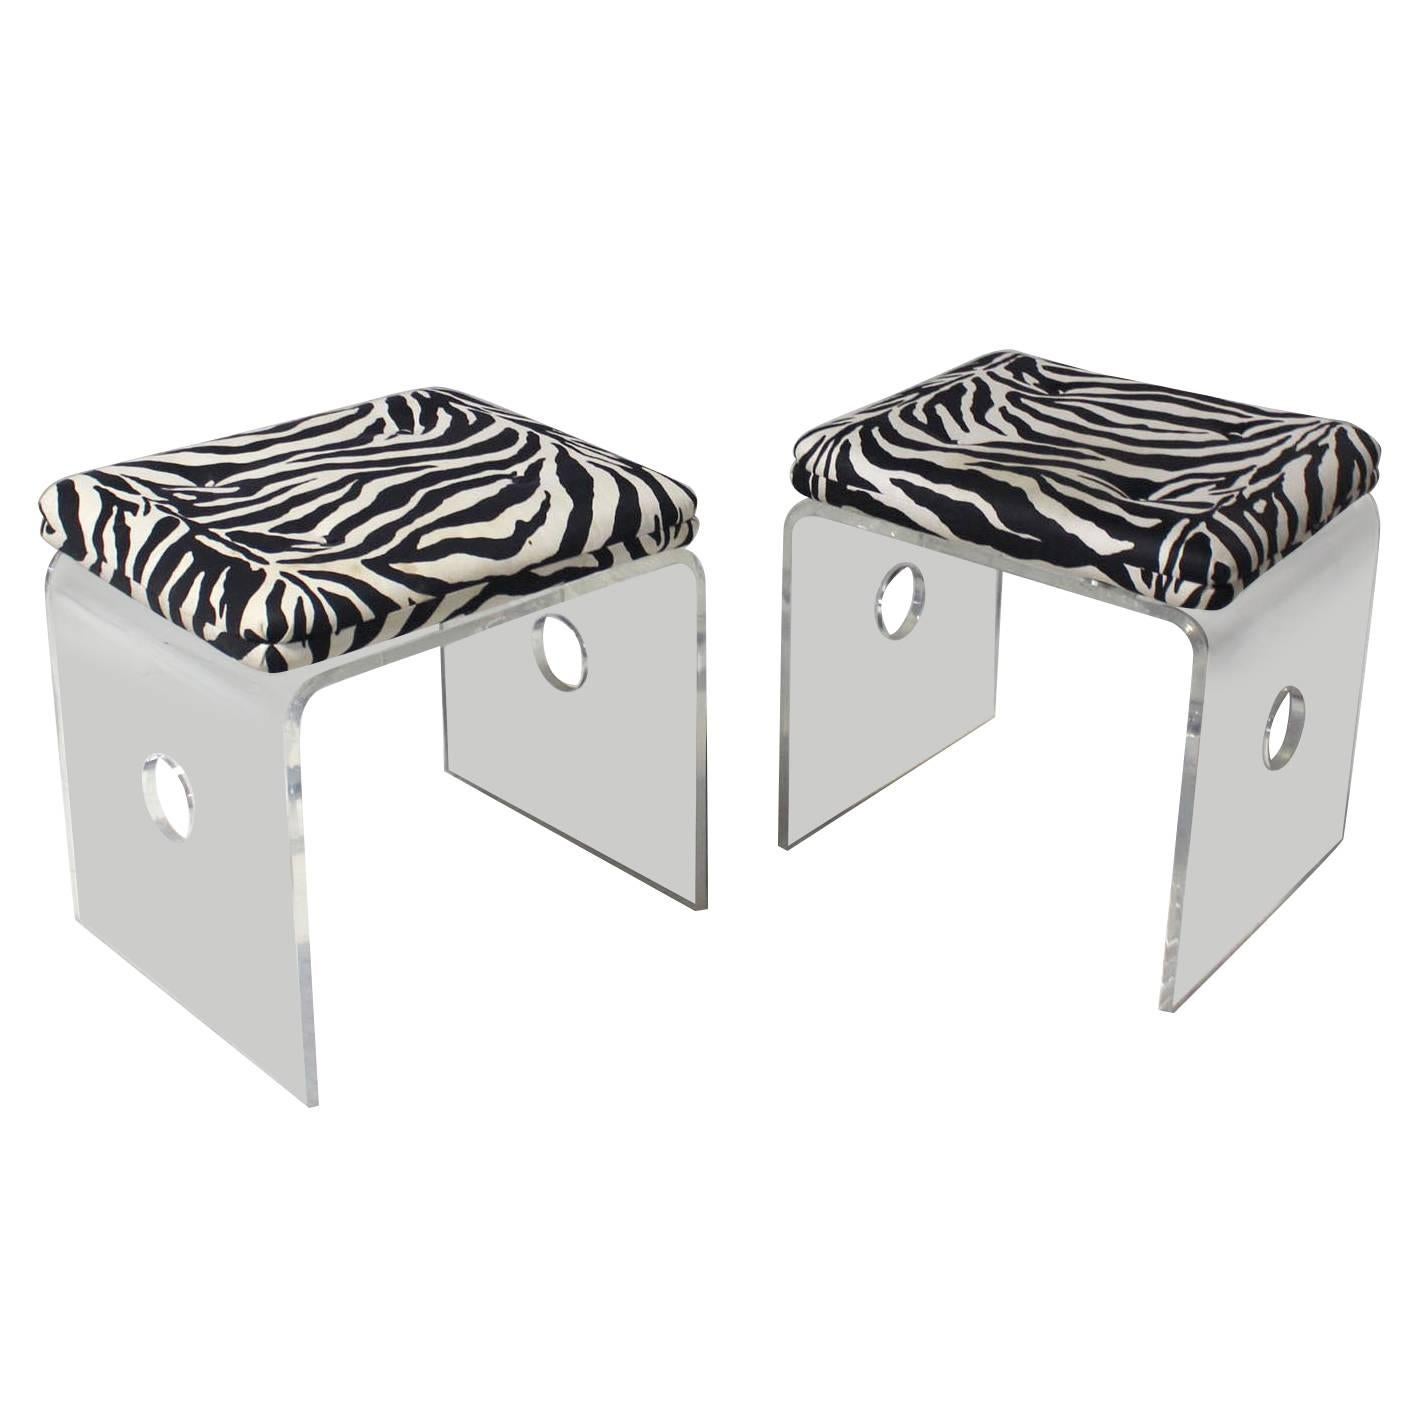 Pair of Bent Lucite Benches w/ Zebra Upholstery Cushions